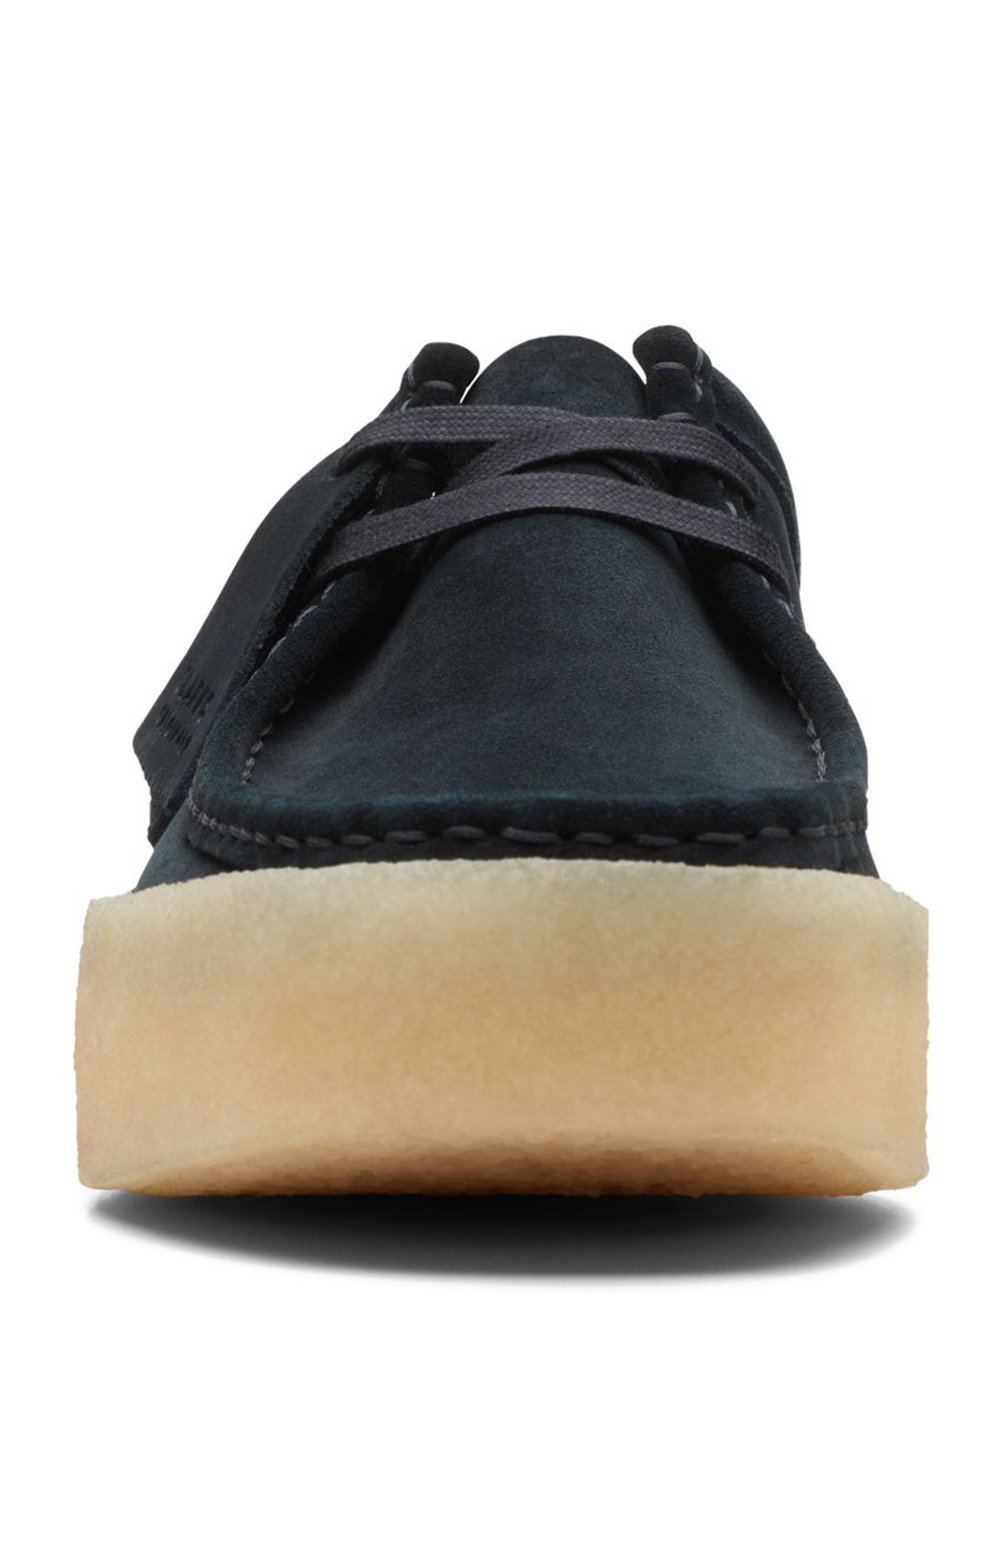 A man wearing the Clarks Originals Wallabee Cup Low Men's Black Suede 26167285 shoes while walking on a city sidewalk